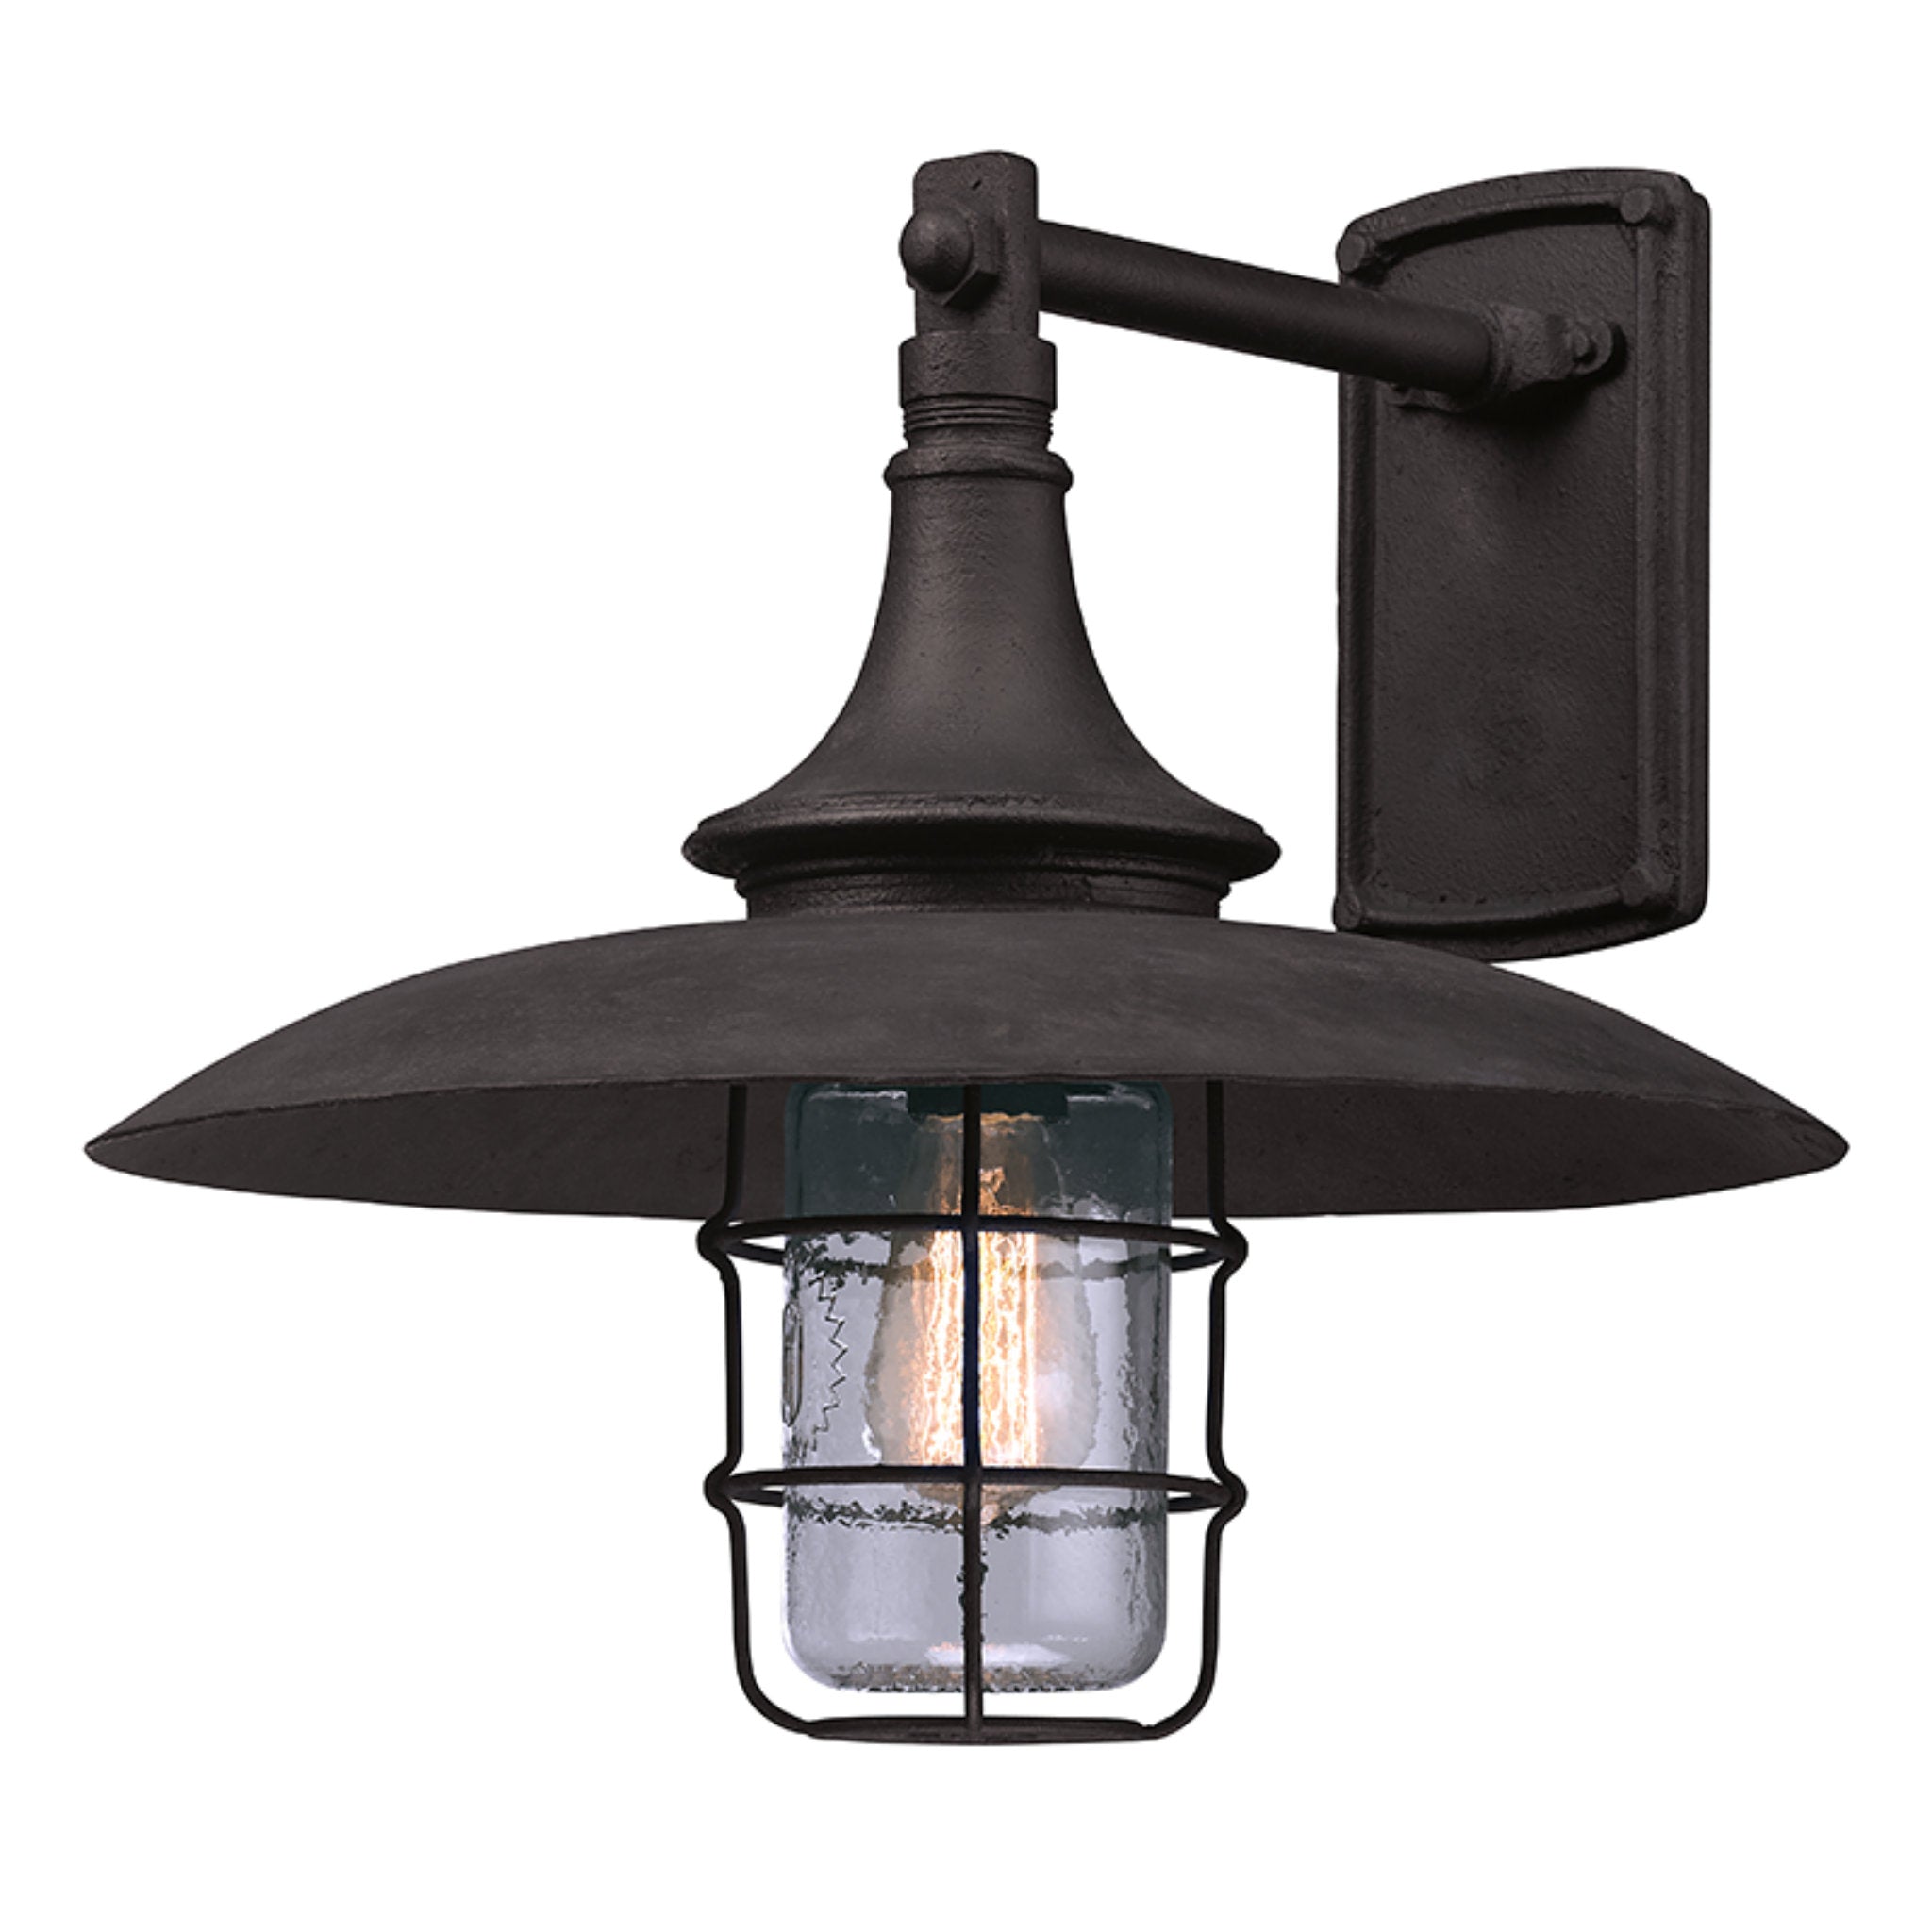 Allegheny 1 Light Wall Sconce in Heritage Bronze